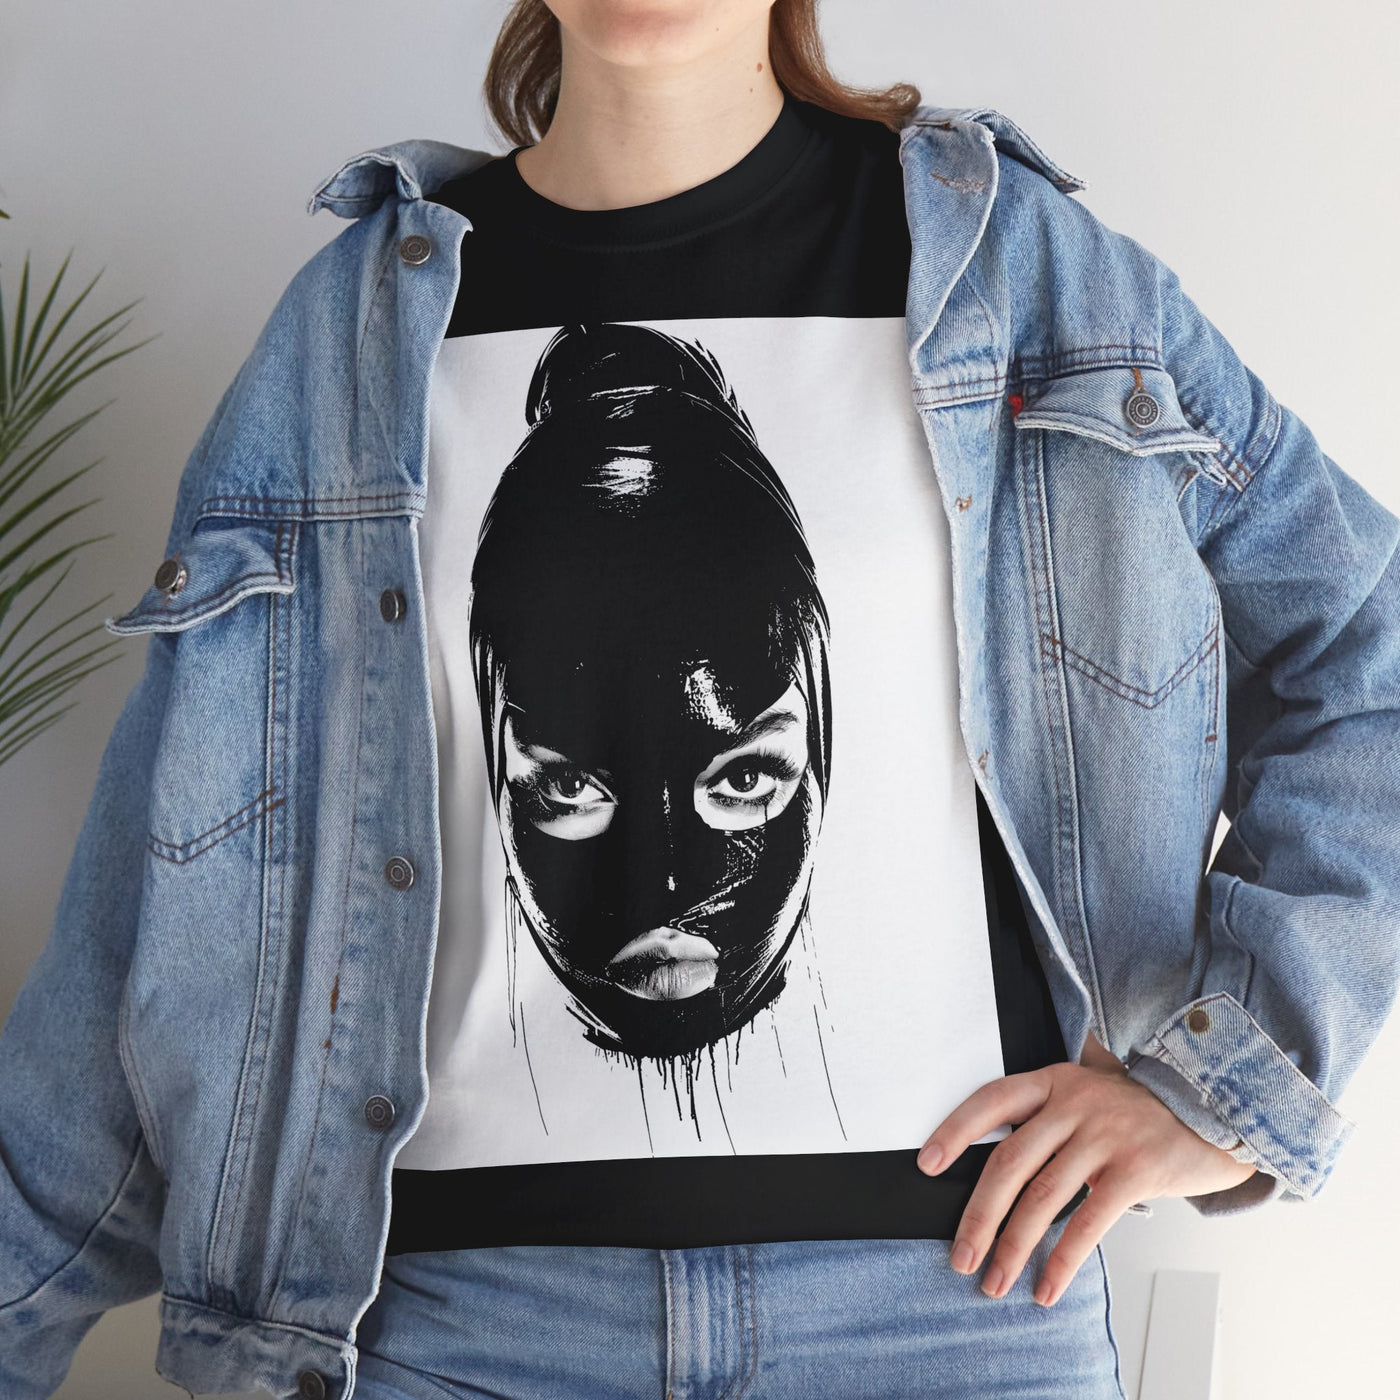 Head of Wicked Girl with Latex Hood T-Shirt